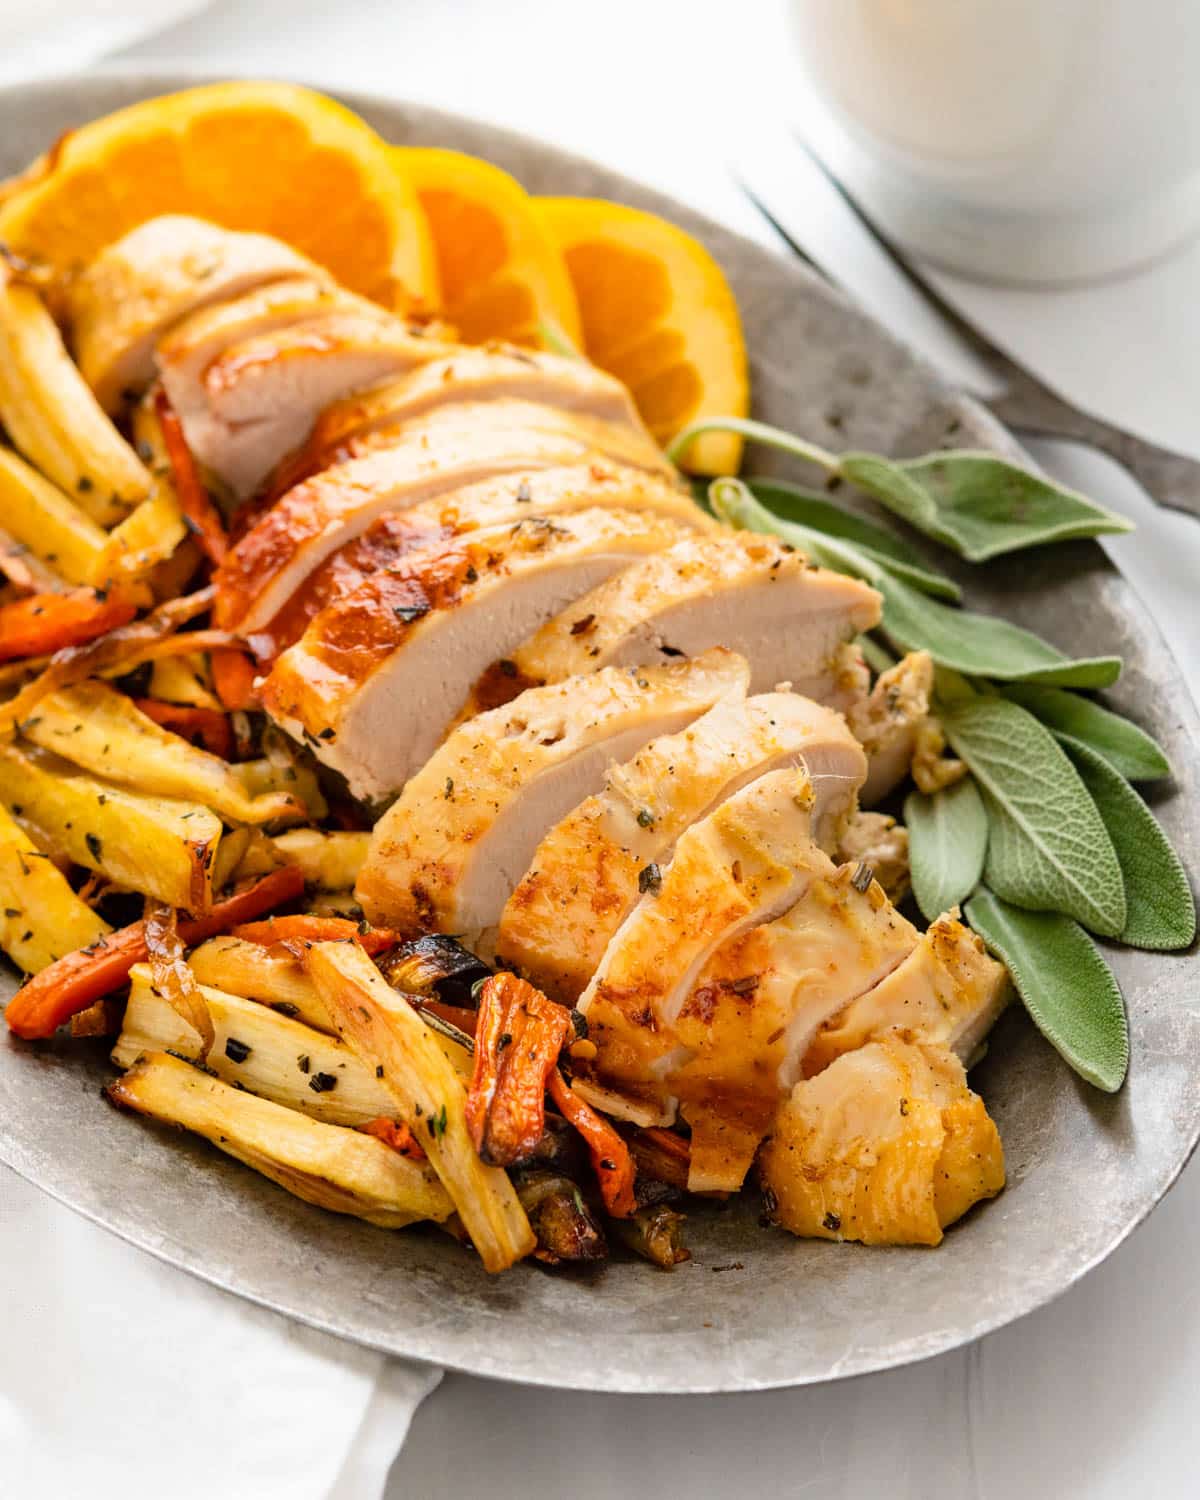 A platter of marinated roast turkey breast with carrots and parsnips.